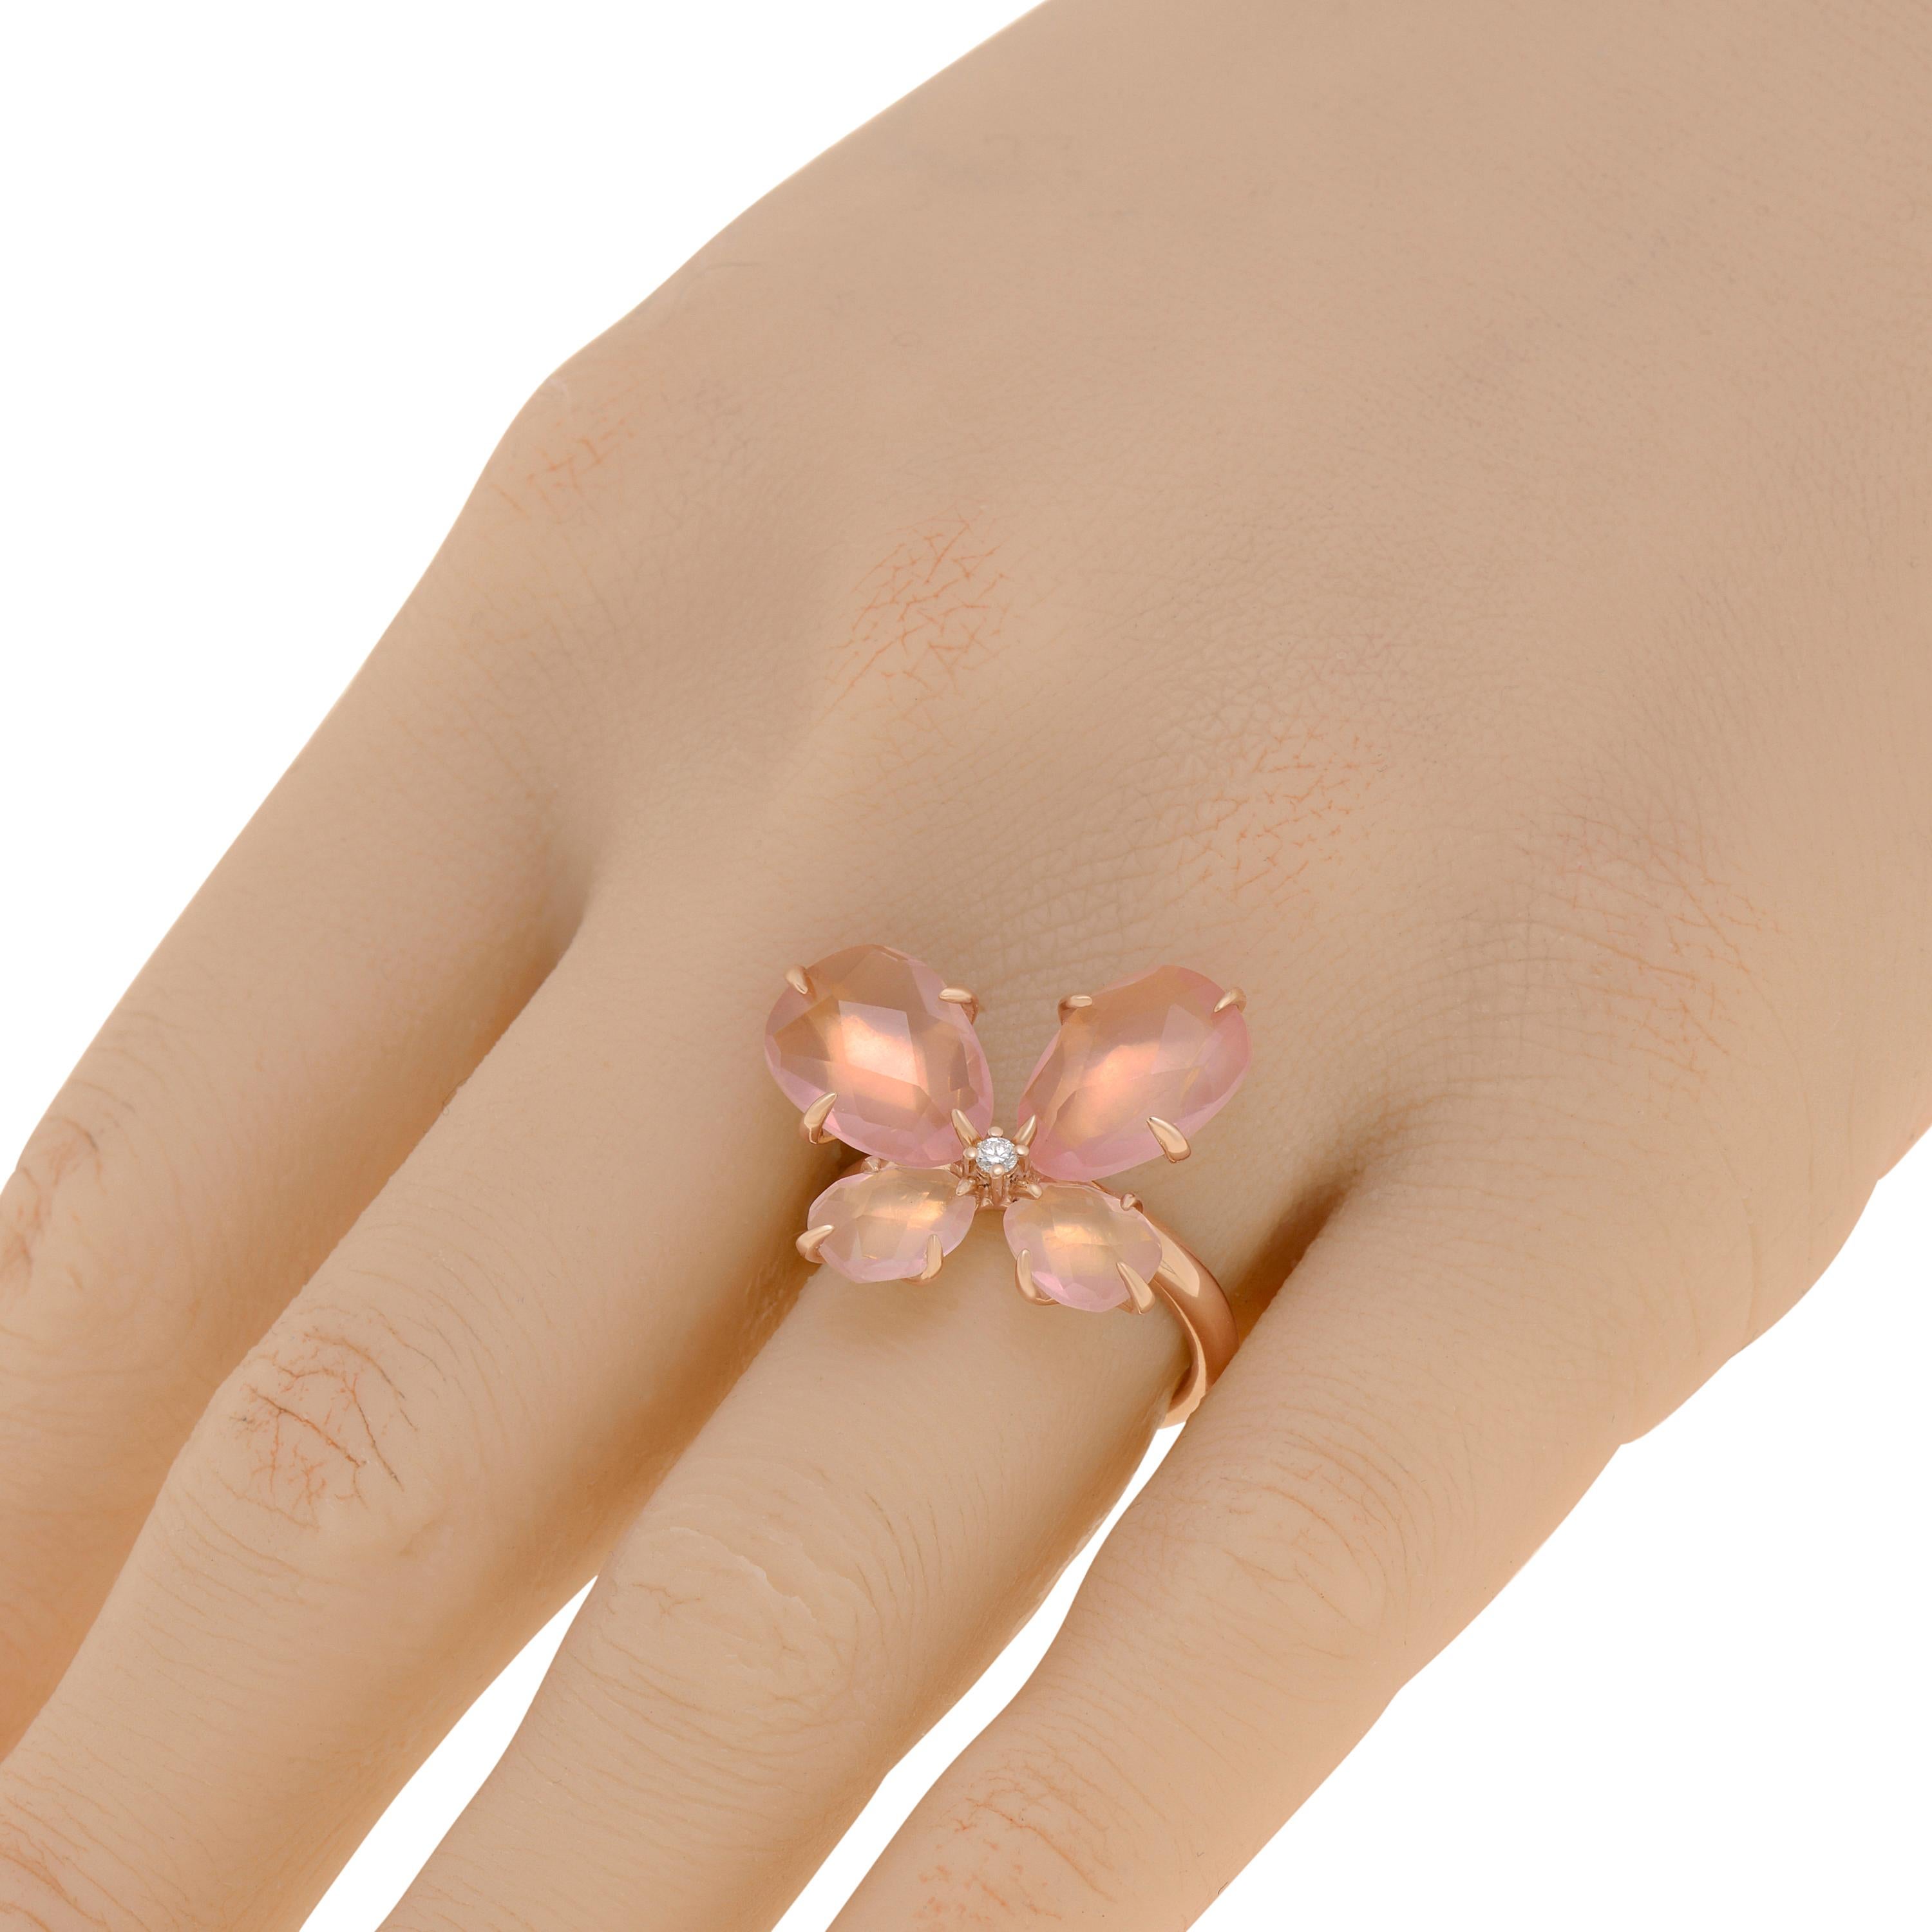 Mimi Milano 18K rose gold statement ring features faceted pink Quartz petals sparkling with a 0.04ct. tw. center accent diamond. The ring size is 6.5 (52). The decoration size is 7/8